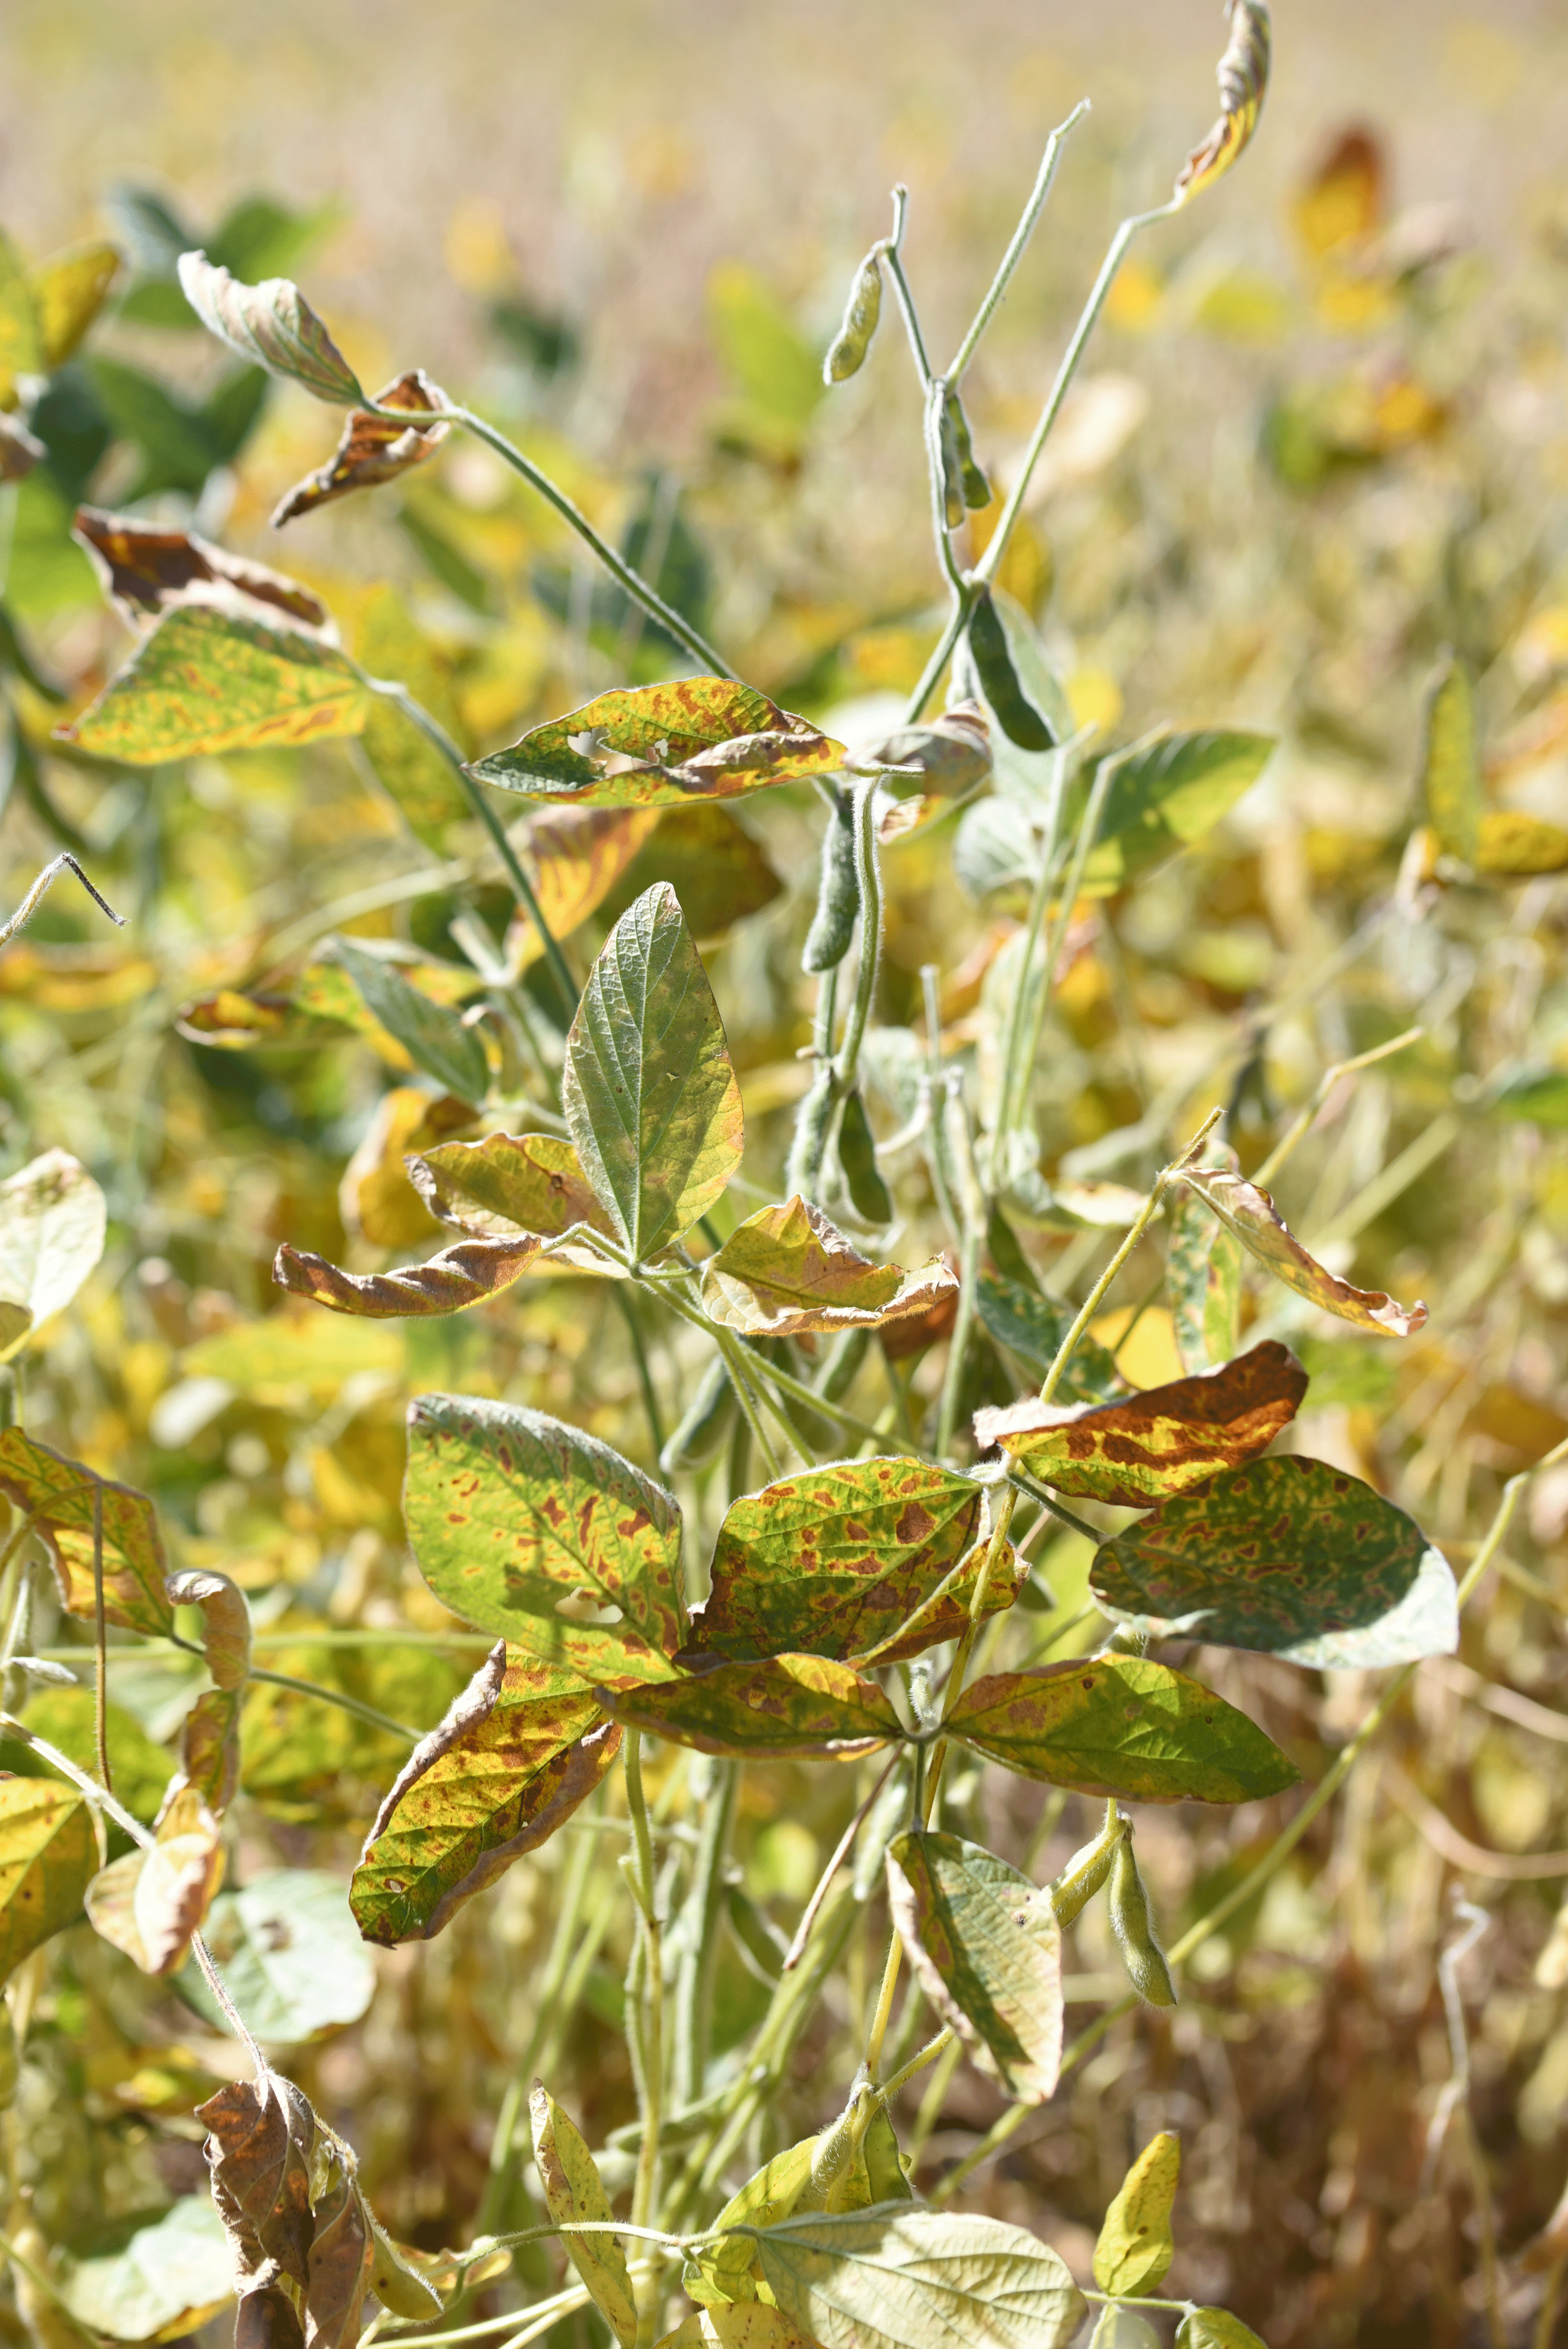 A soybean plant with some leaves with extensive yellow and brown spots and others that are completely brown and curled up.